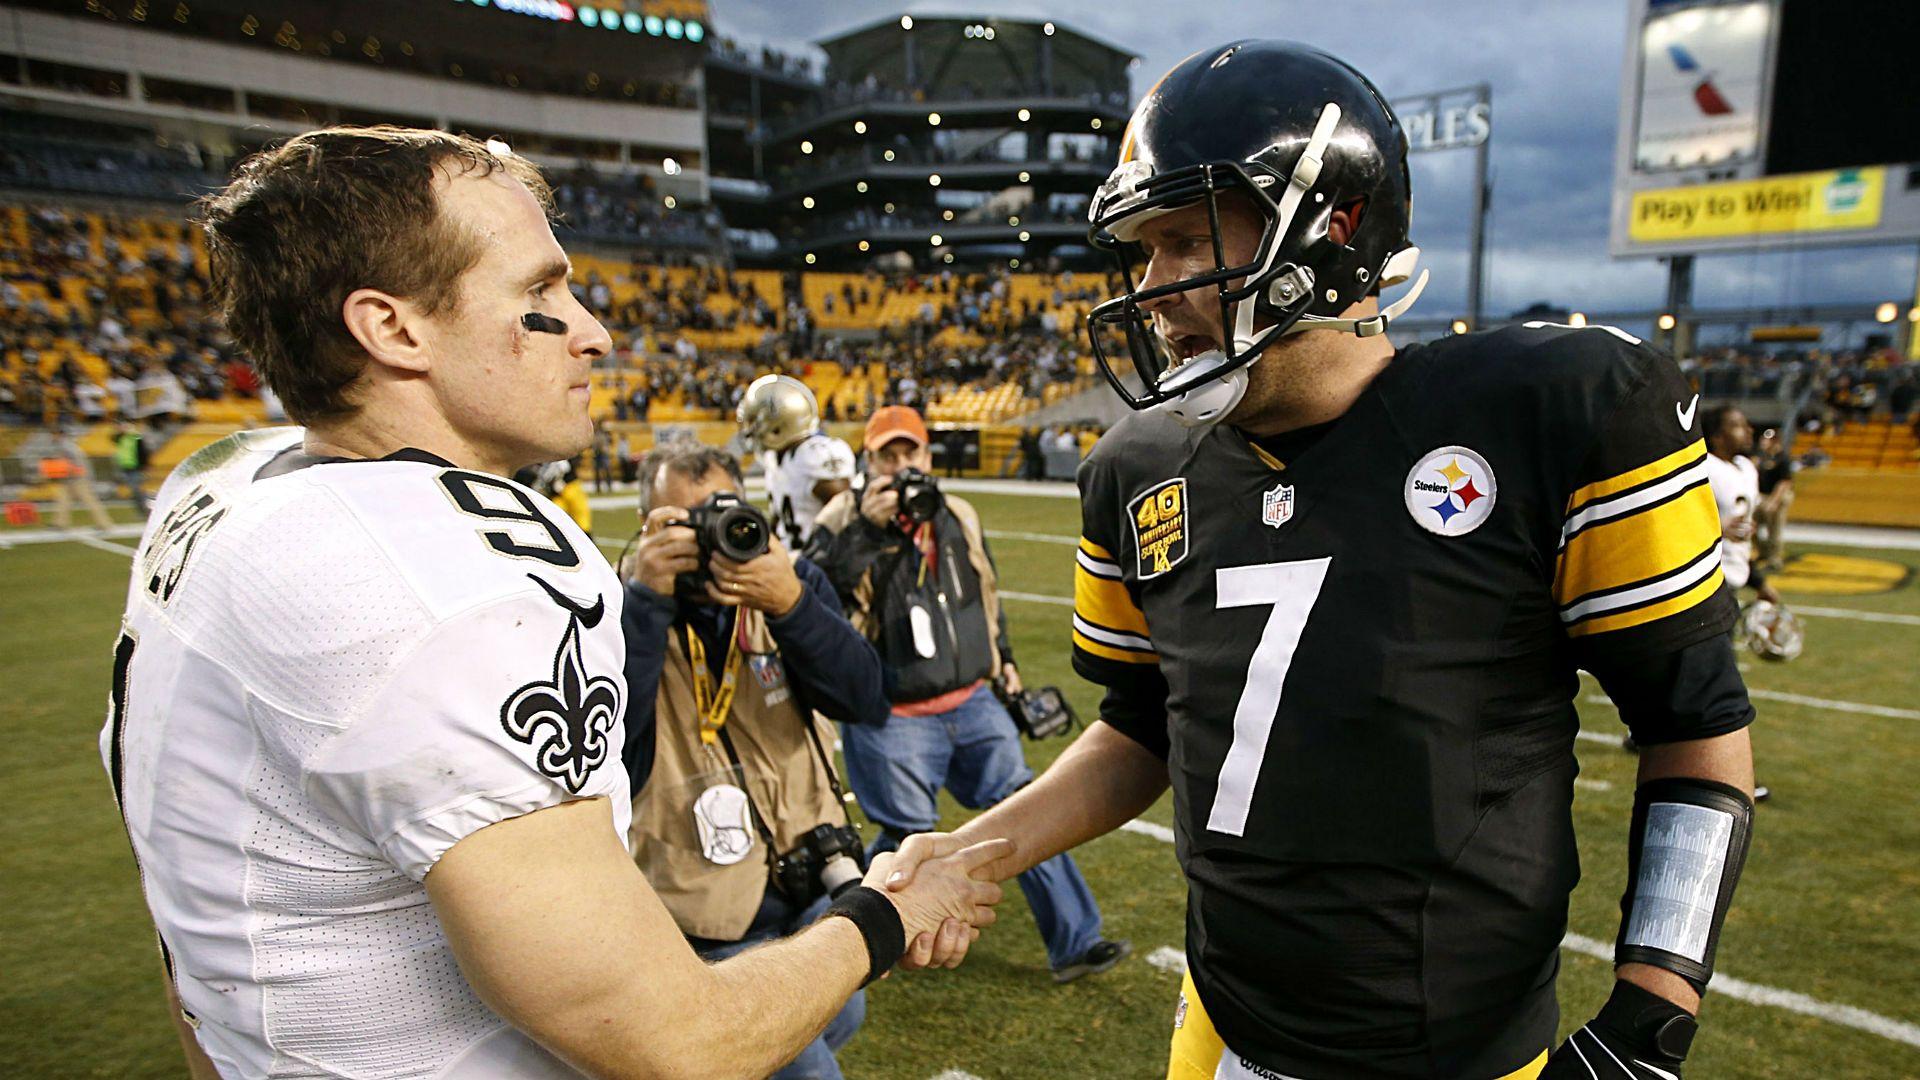 Drew Brees to replace Ben Roethlisberger in Pro Bowl. NFL